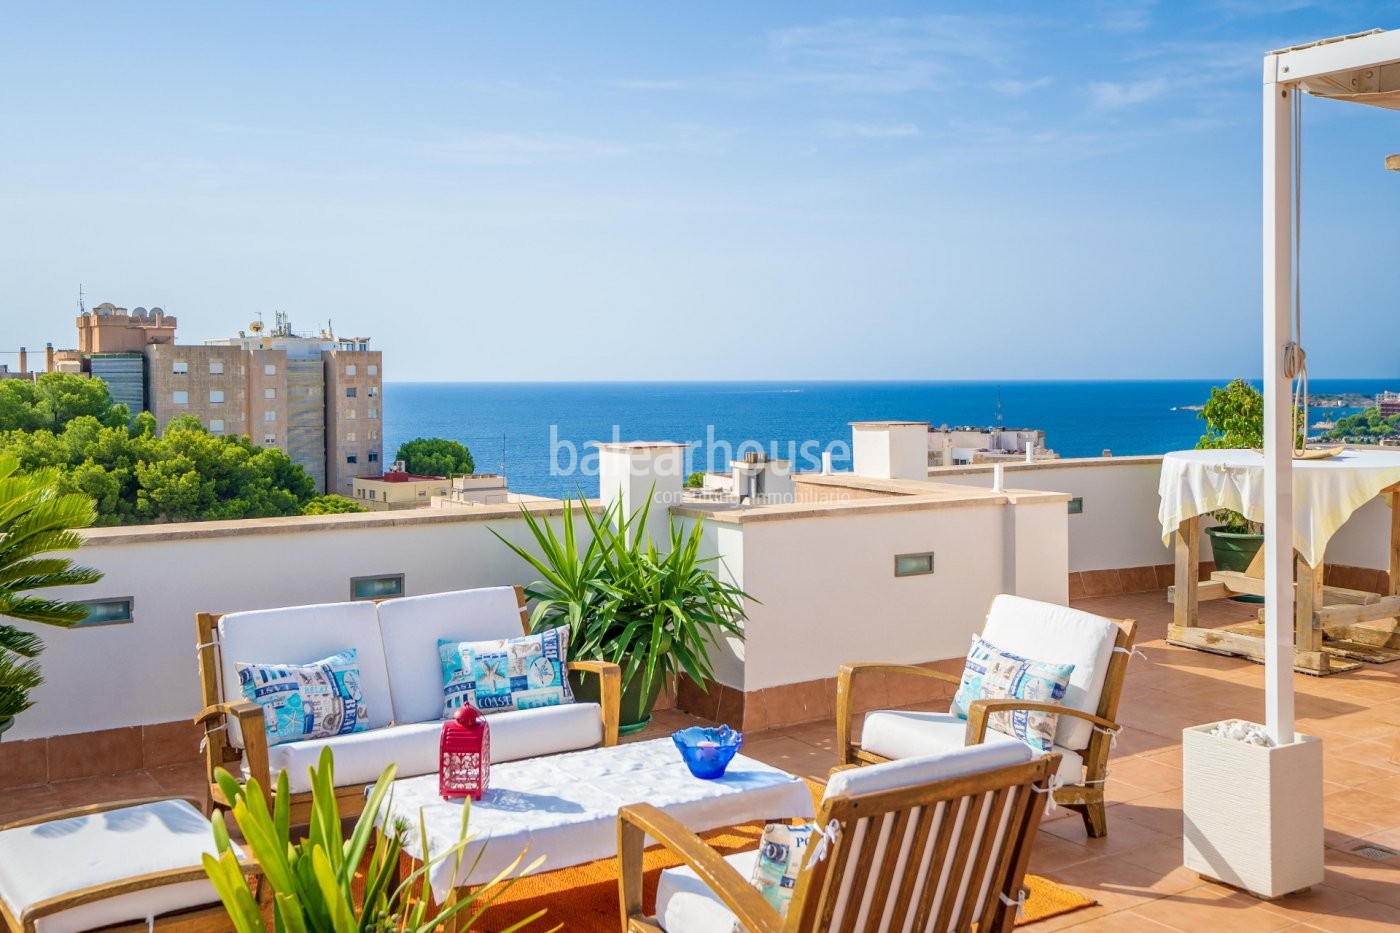 Magnificent penthouse in San Agustin full of light with private solarium and splendid sea views.